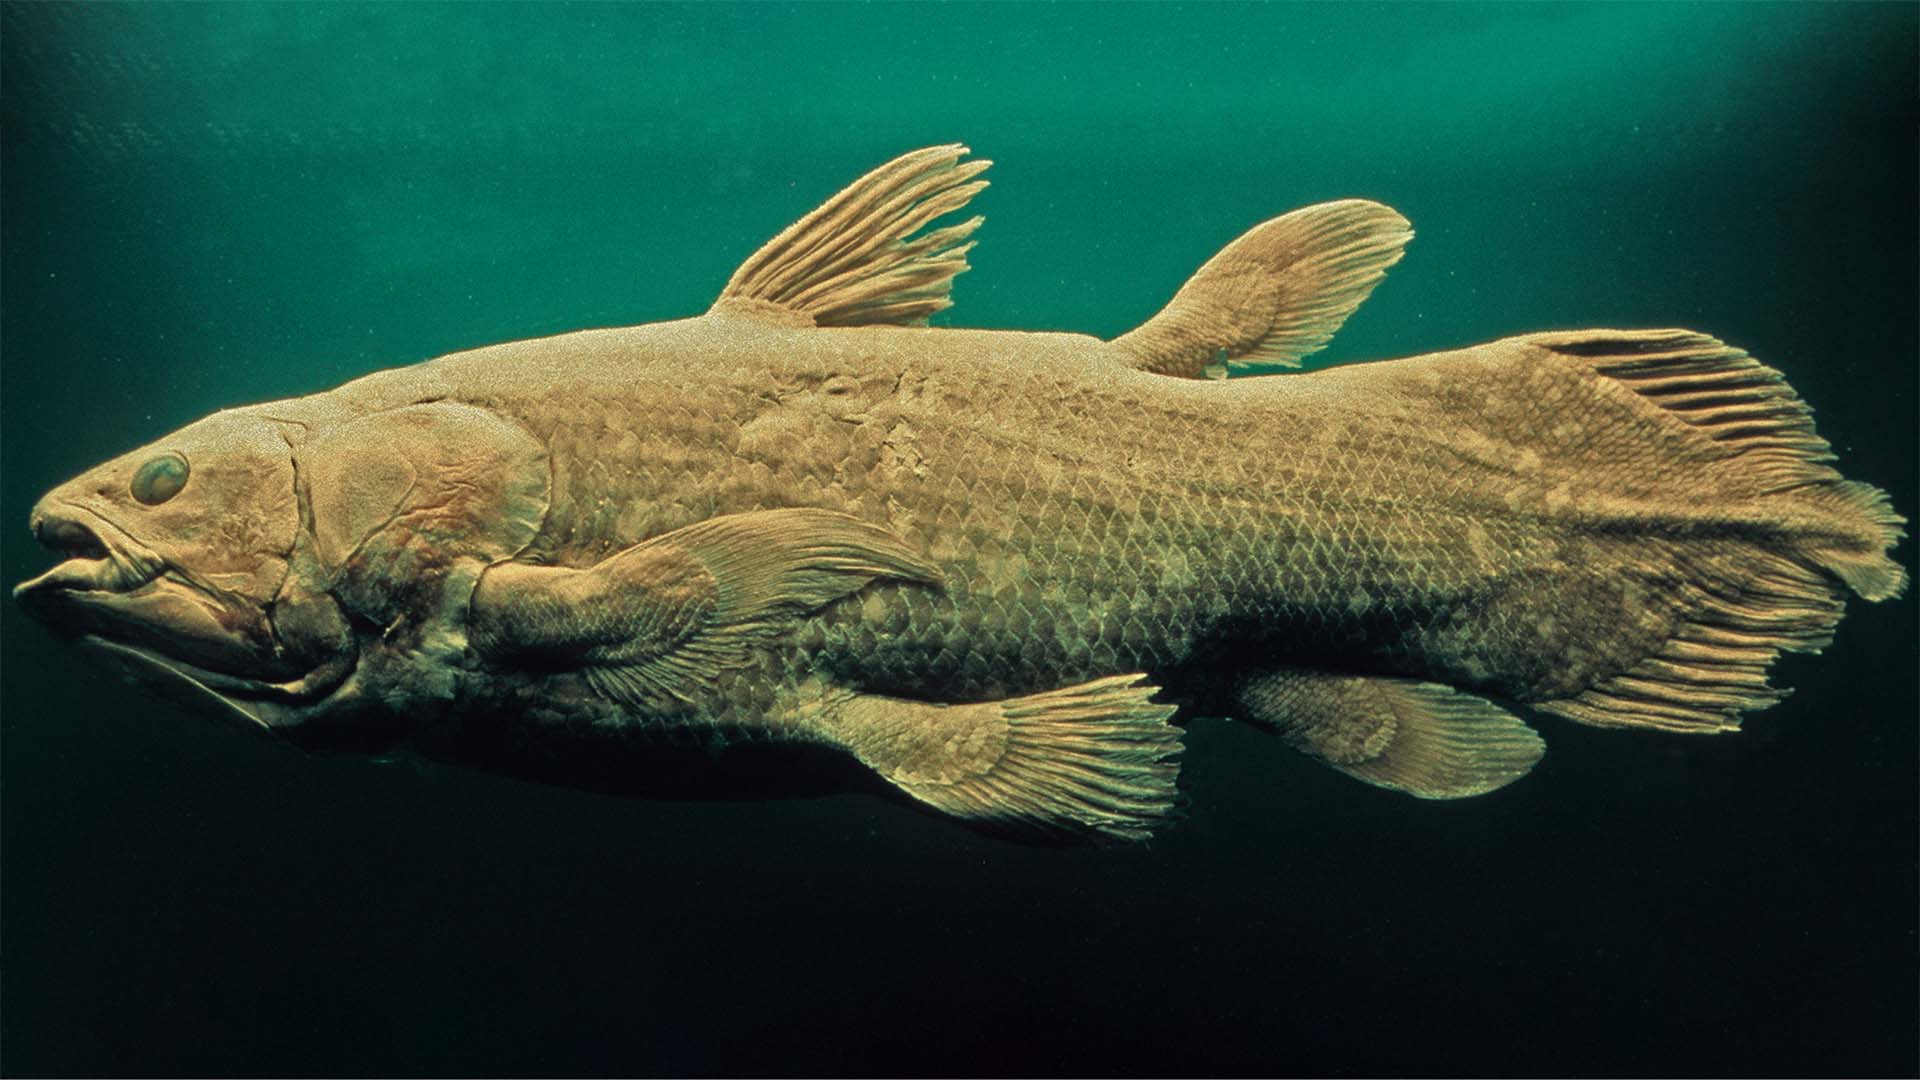 Thanks to their limb-like fins, coelacanths are actually more closely related to reptiles, amphibians, and mammals than they are to fish. (© Getty Images)